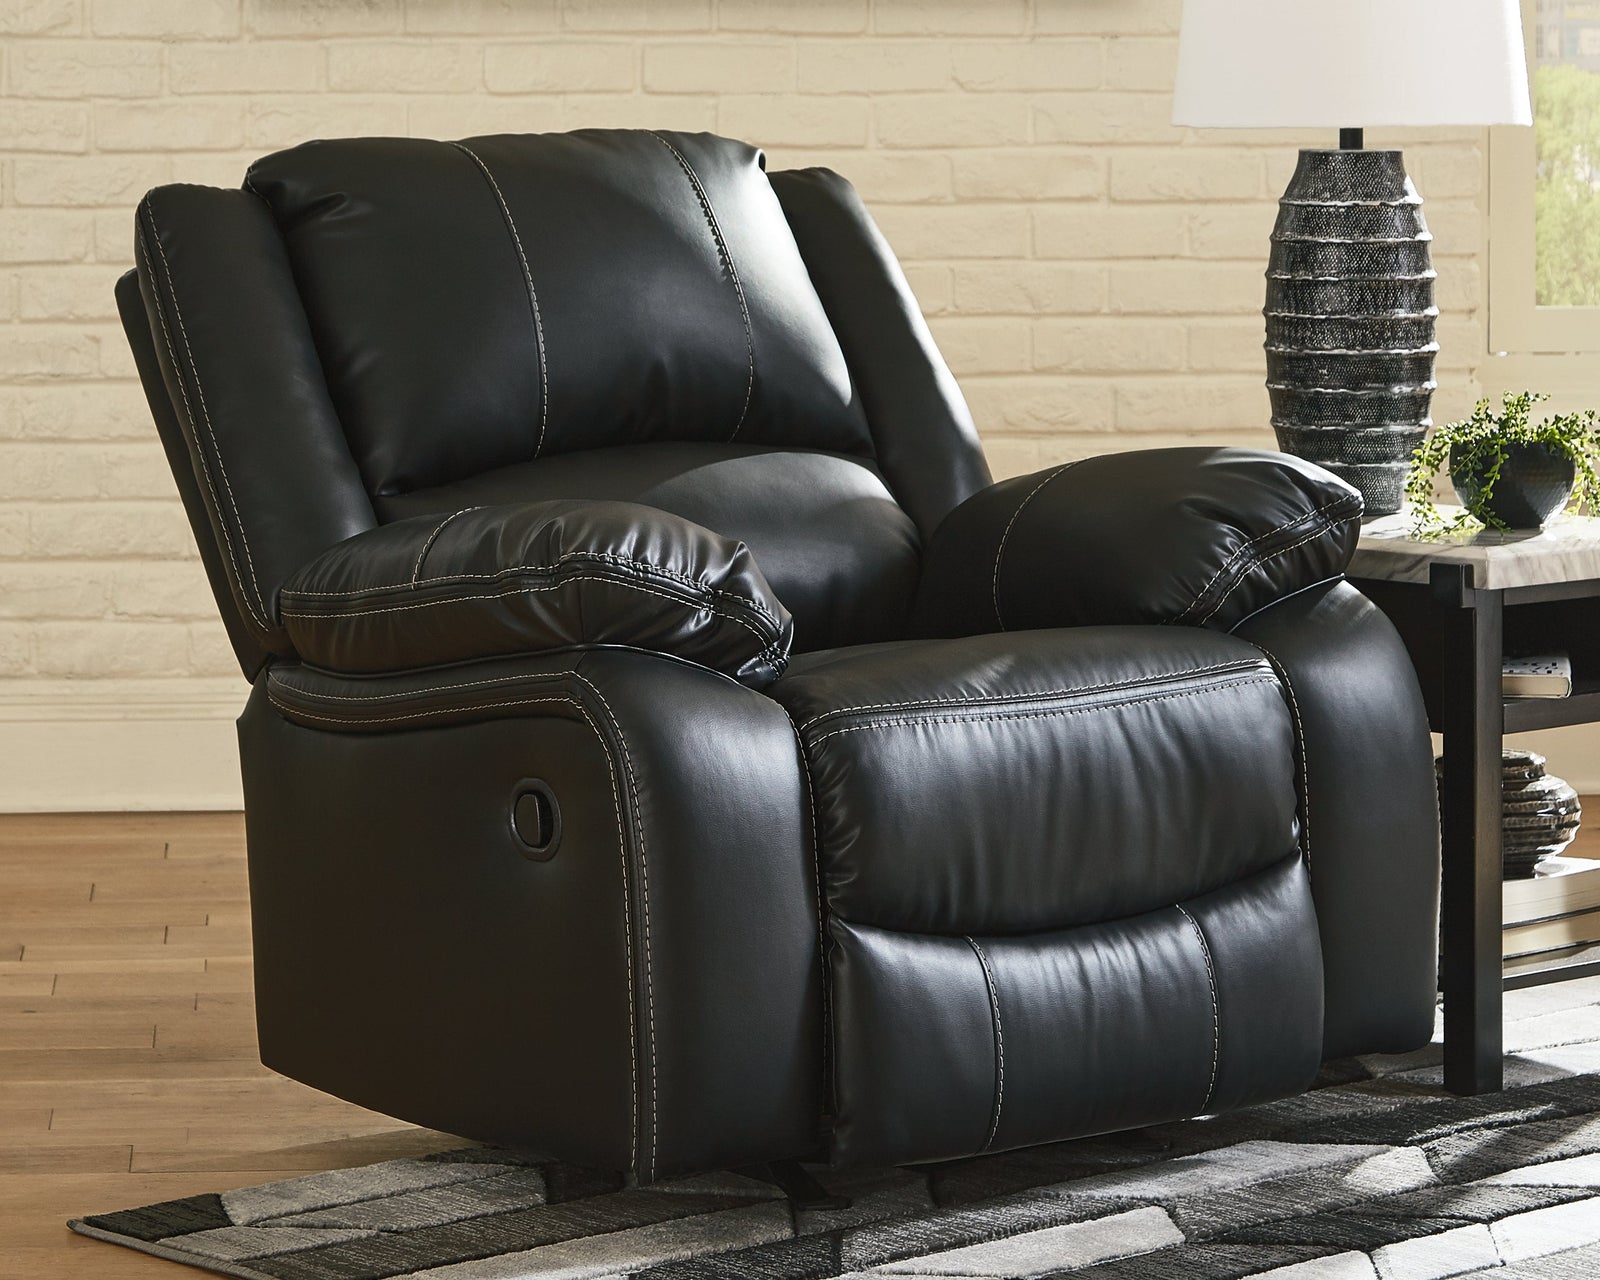 Calderwell Black Faux Leather Recliner